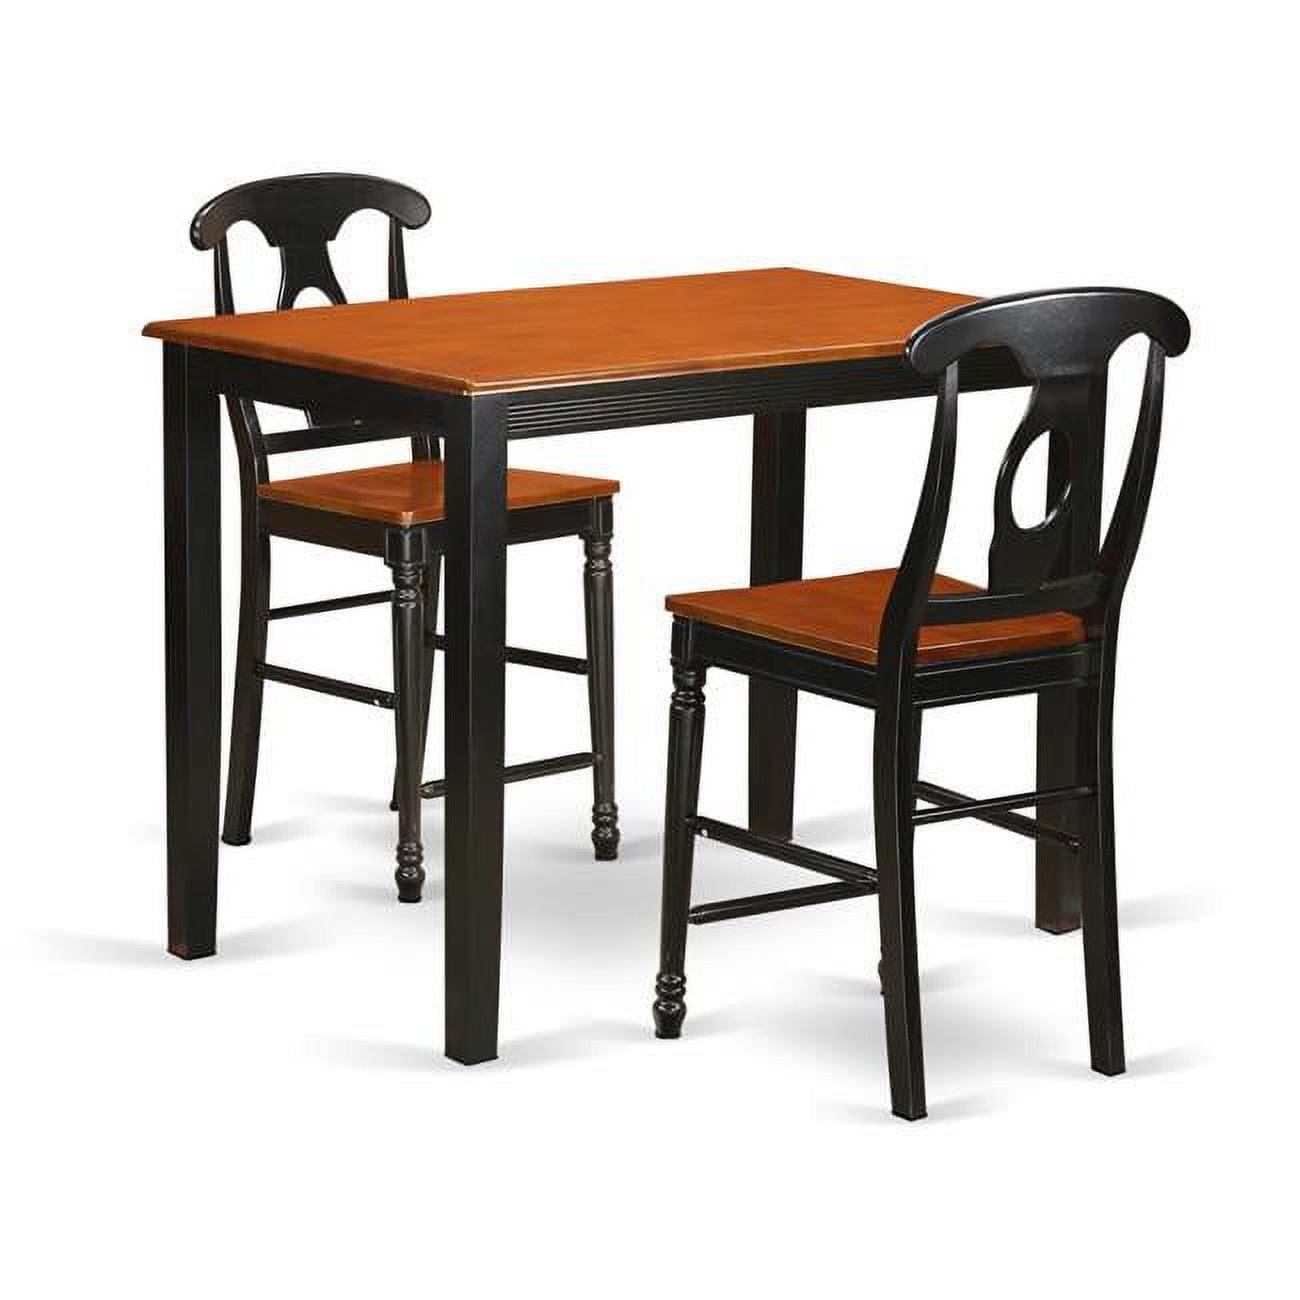 Black & Cherry Square Pub Table Set with Slatted Wood Chairs